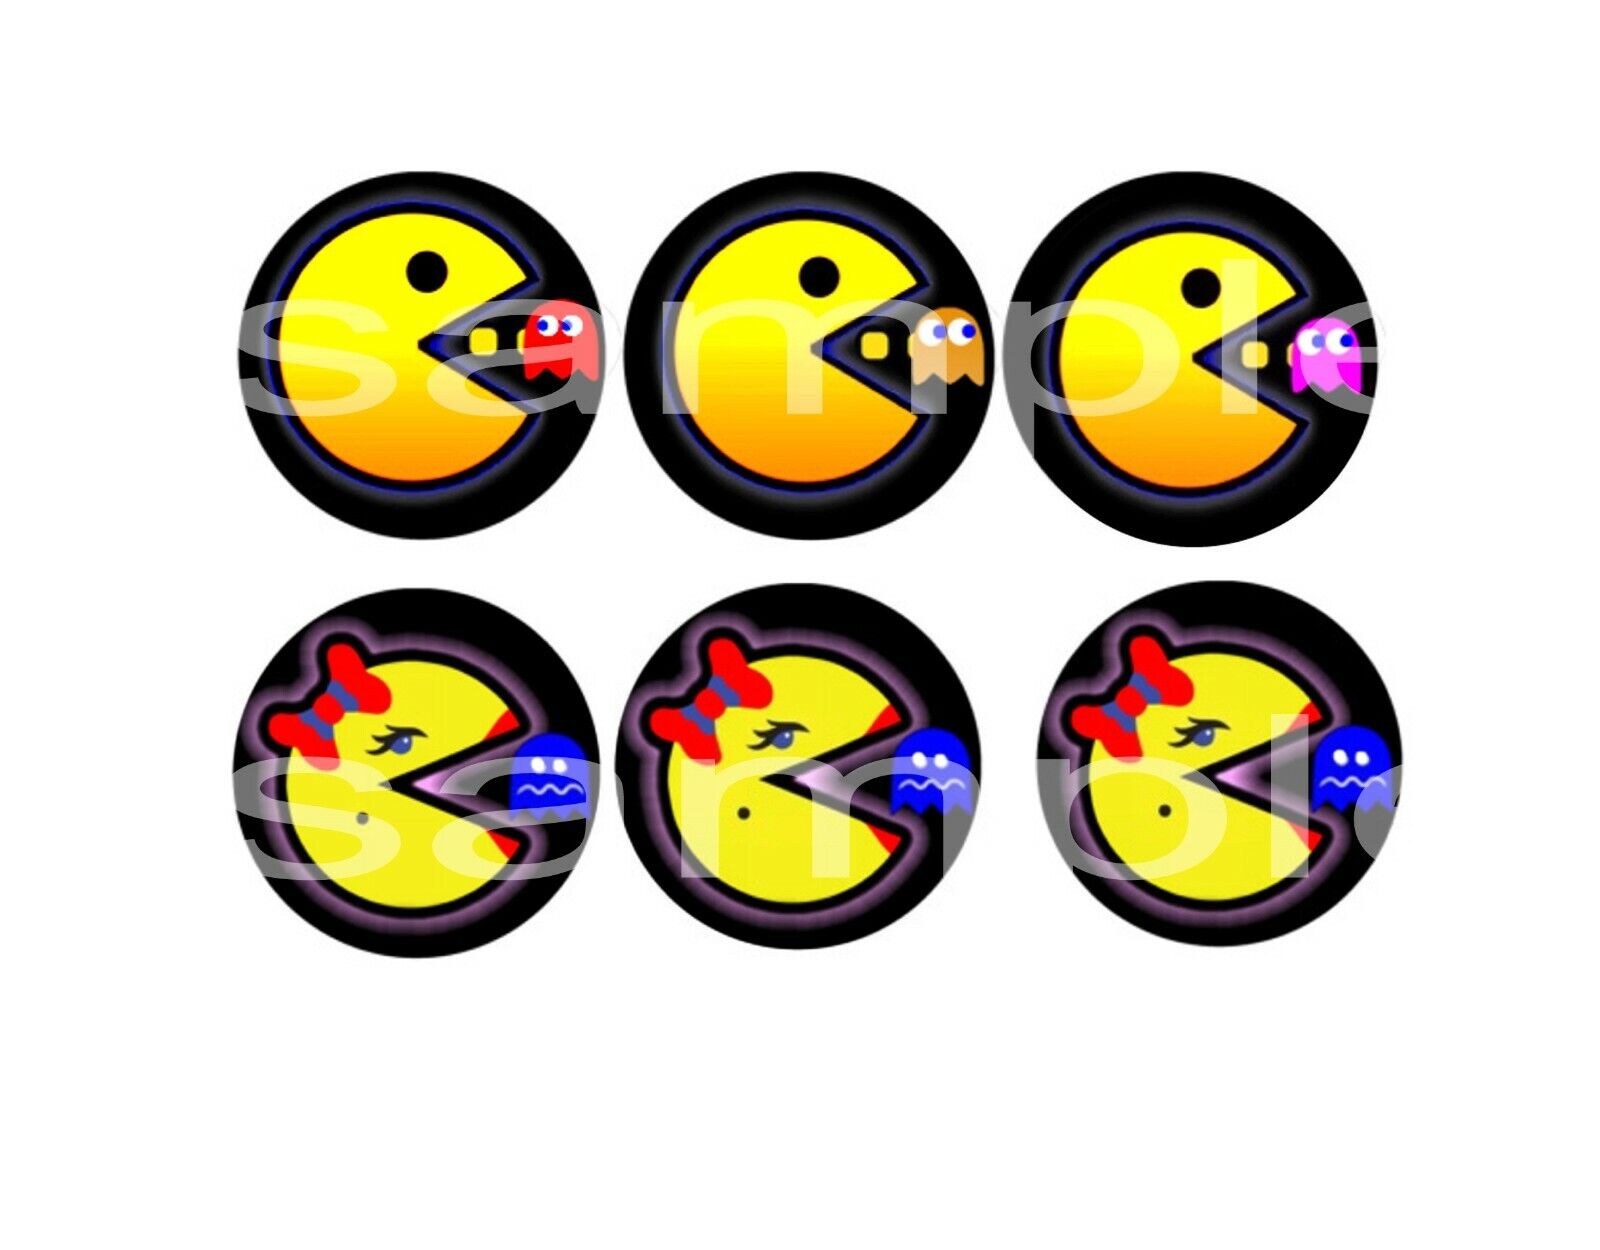 Mr. & Mrs. Pac-Man TARGET ARMOUR CUSHIONED DECALS 